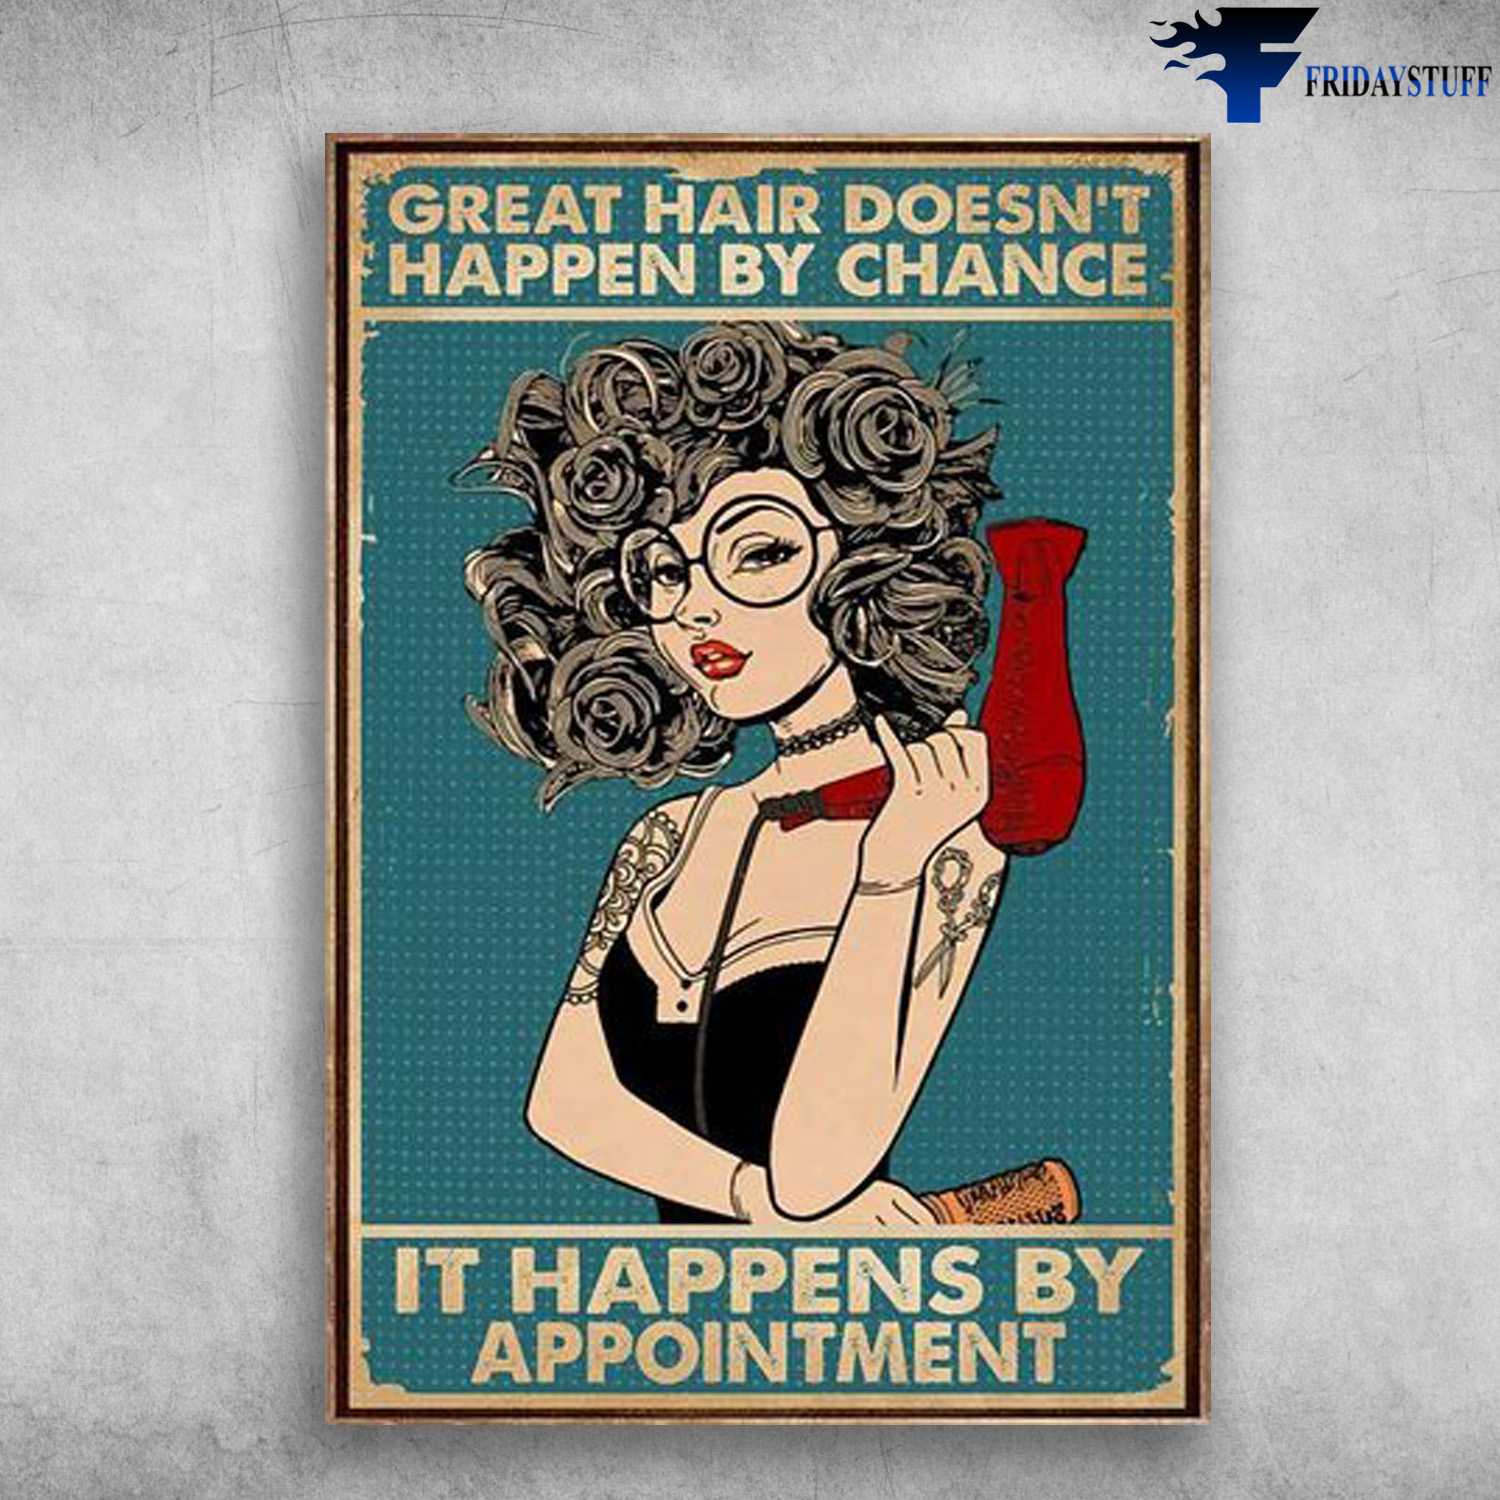 Hairdresser Poster, Hair Care, Great Hair Doesn't Happen By Chance, It Happens By Appointment